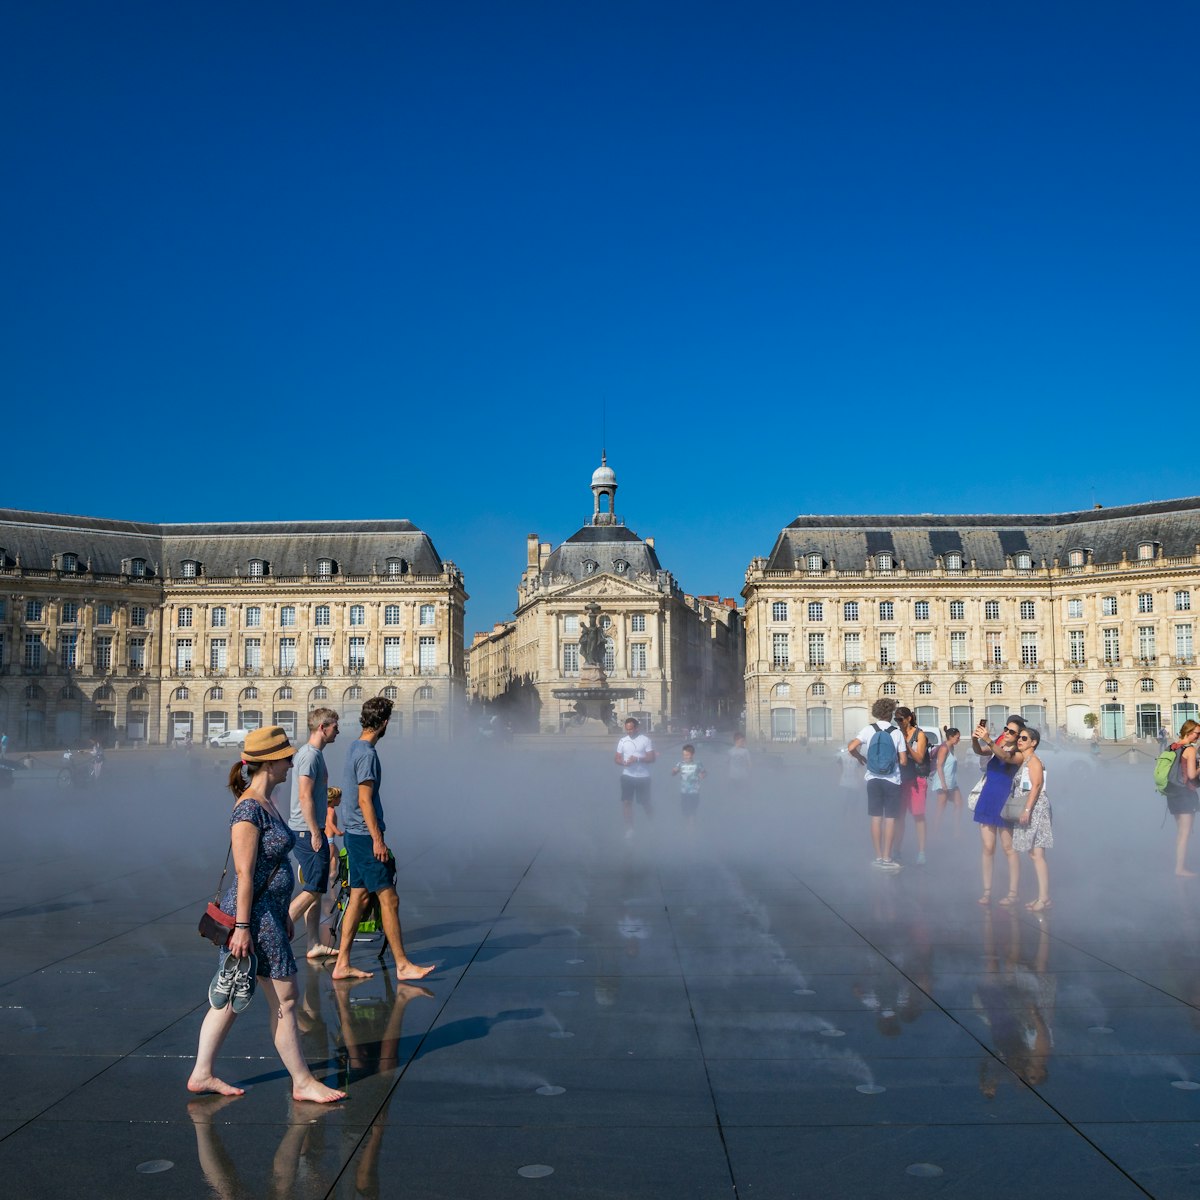 Visitors having fun on the Mirroir d'eau (Water Mirror) of the Place de la Bourse in Bordeaux, France on a hot summer day during a heat wave.